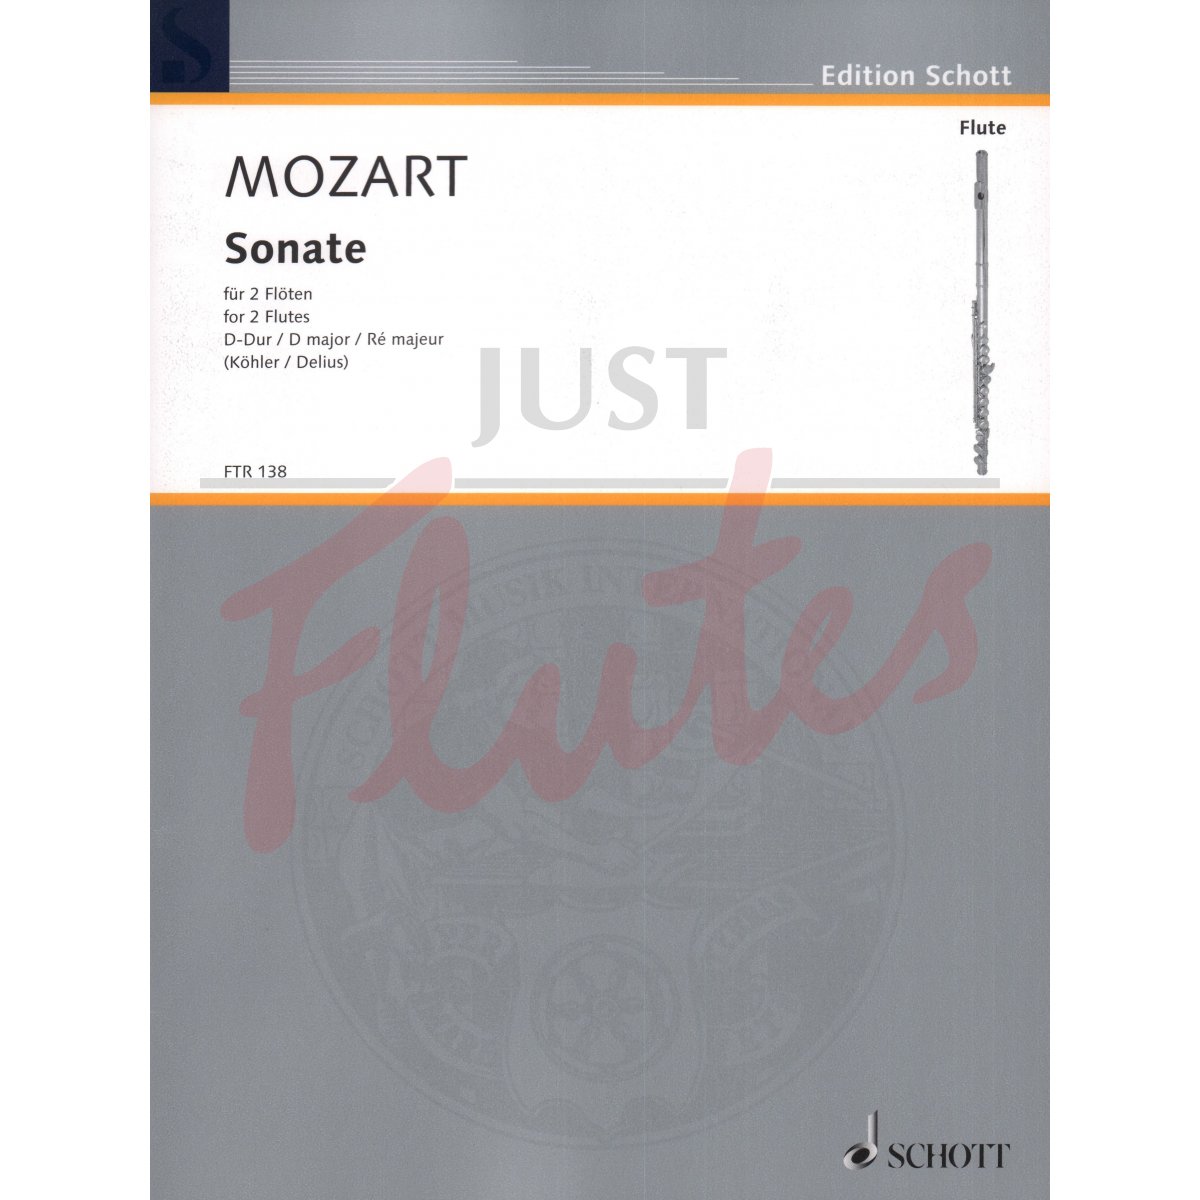 Sonata in D major for Two Flutes